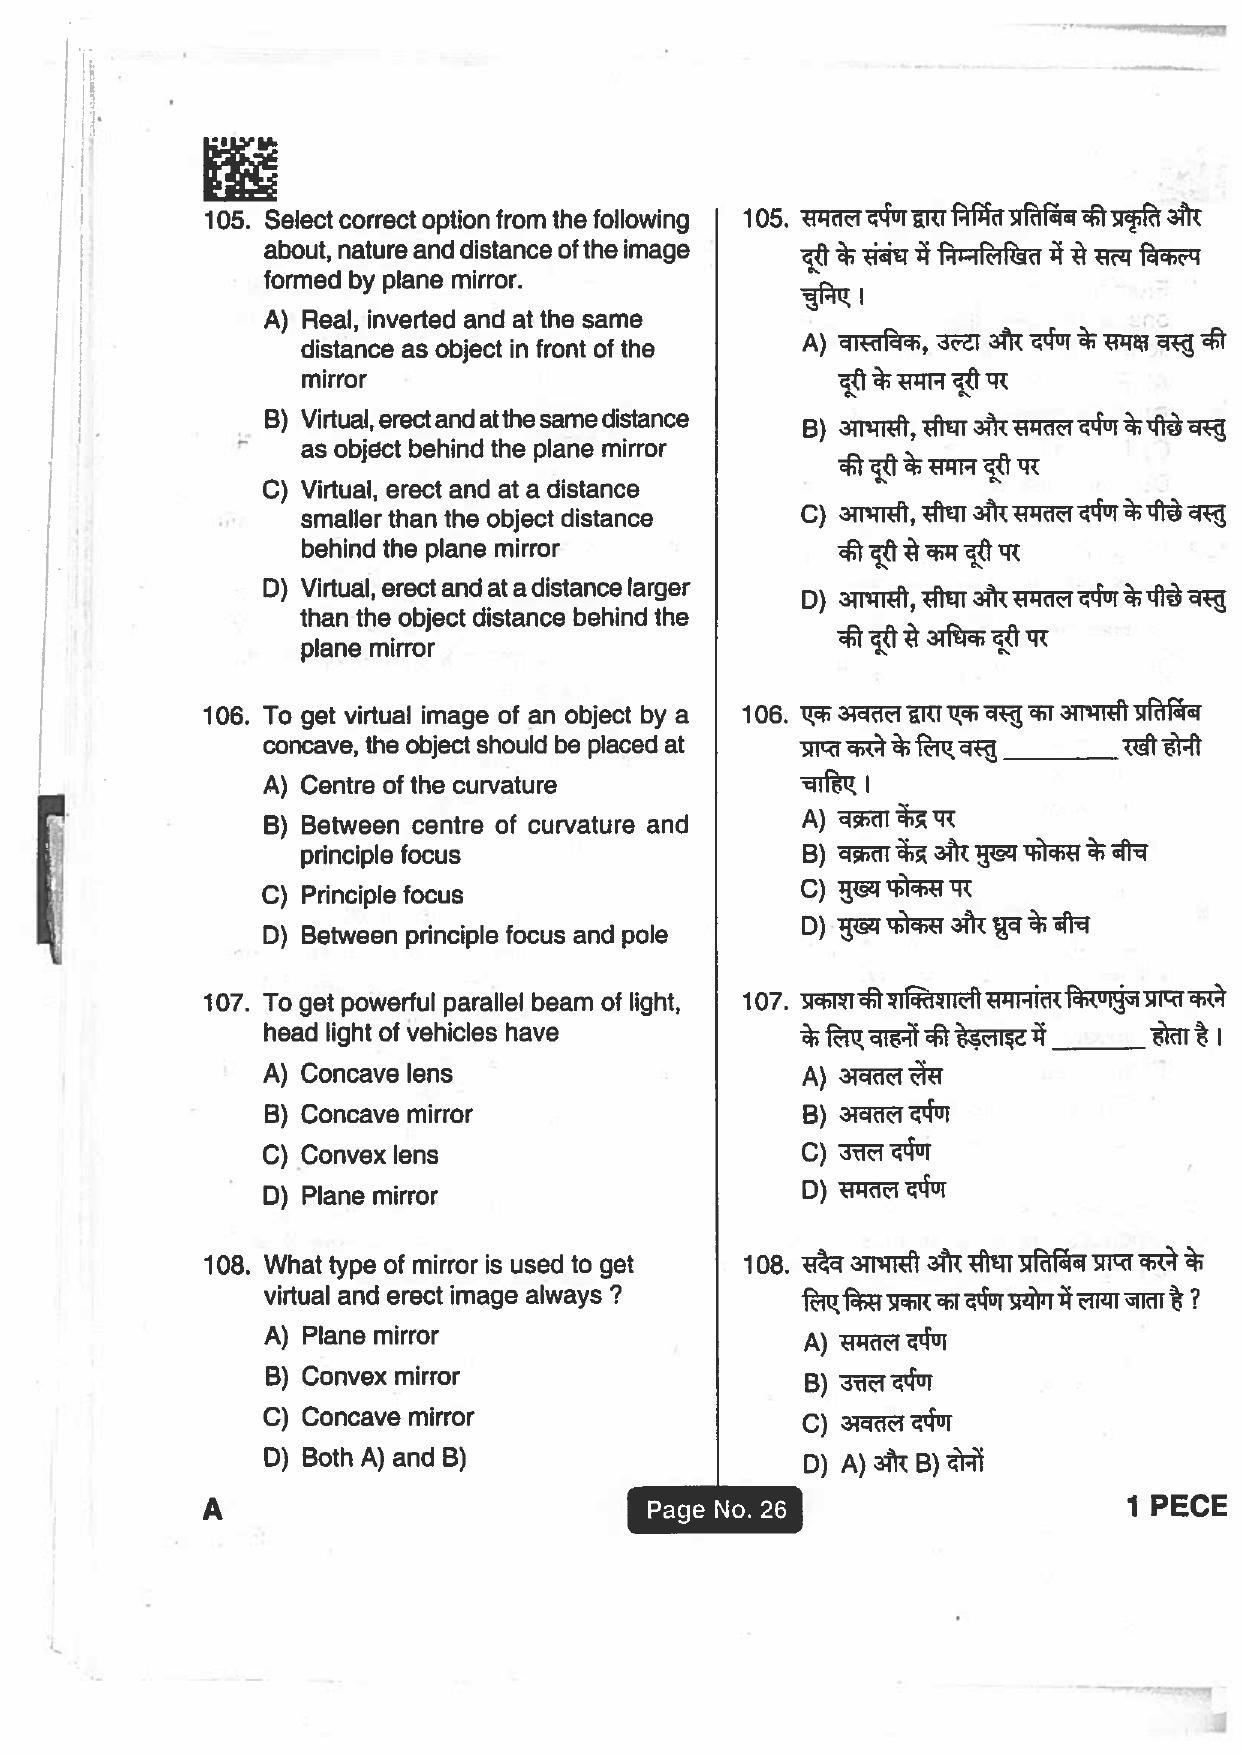 Jharkhand Polytechnic SET A 2018 Question Paper with Answers - Page 25